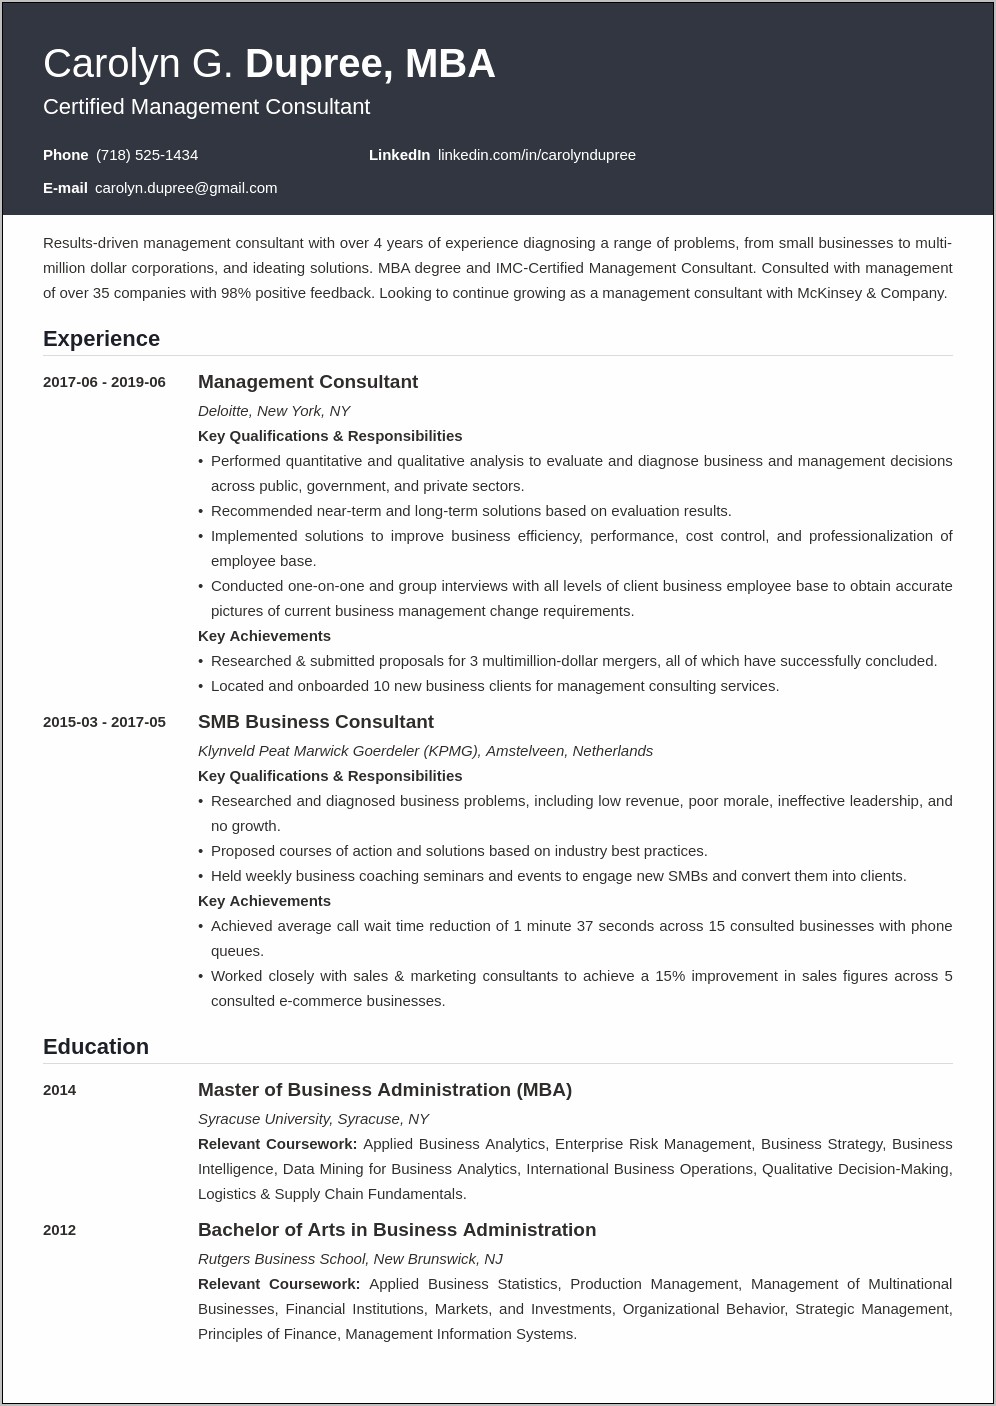 Resume Objective For A Managment Consultant